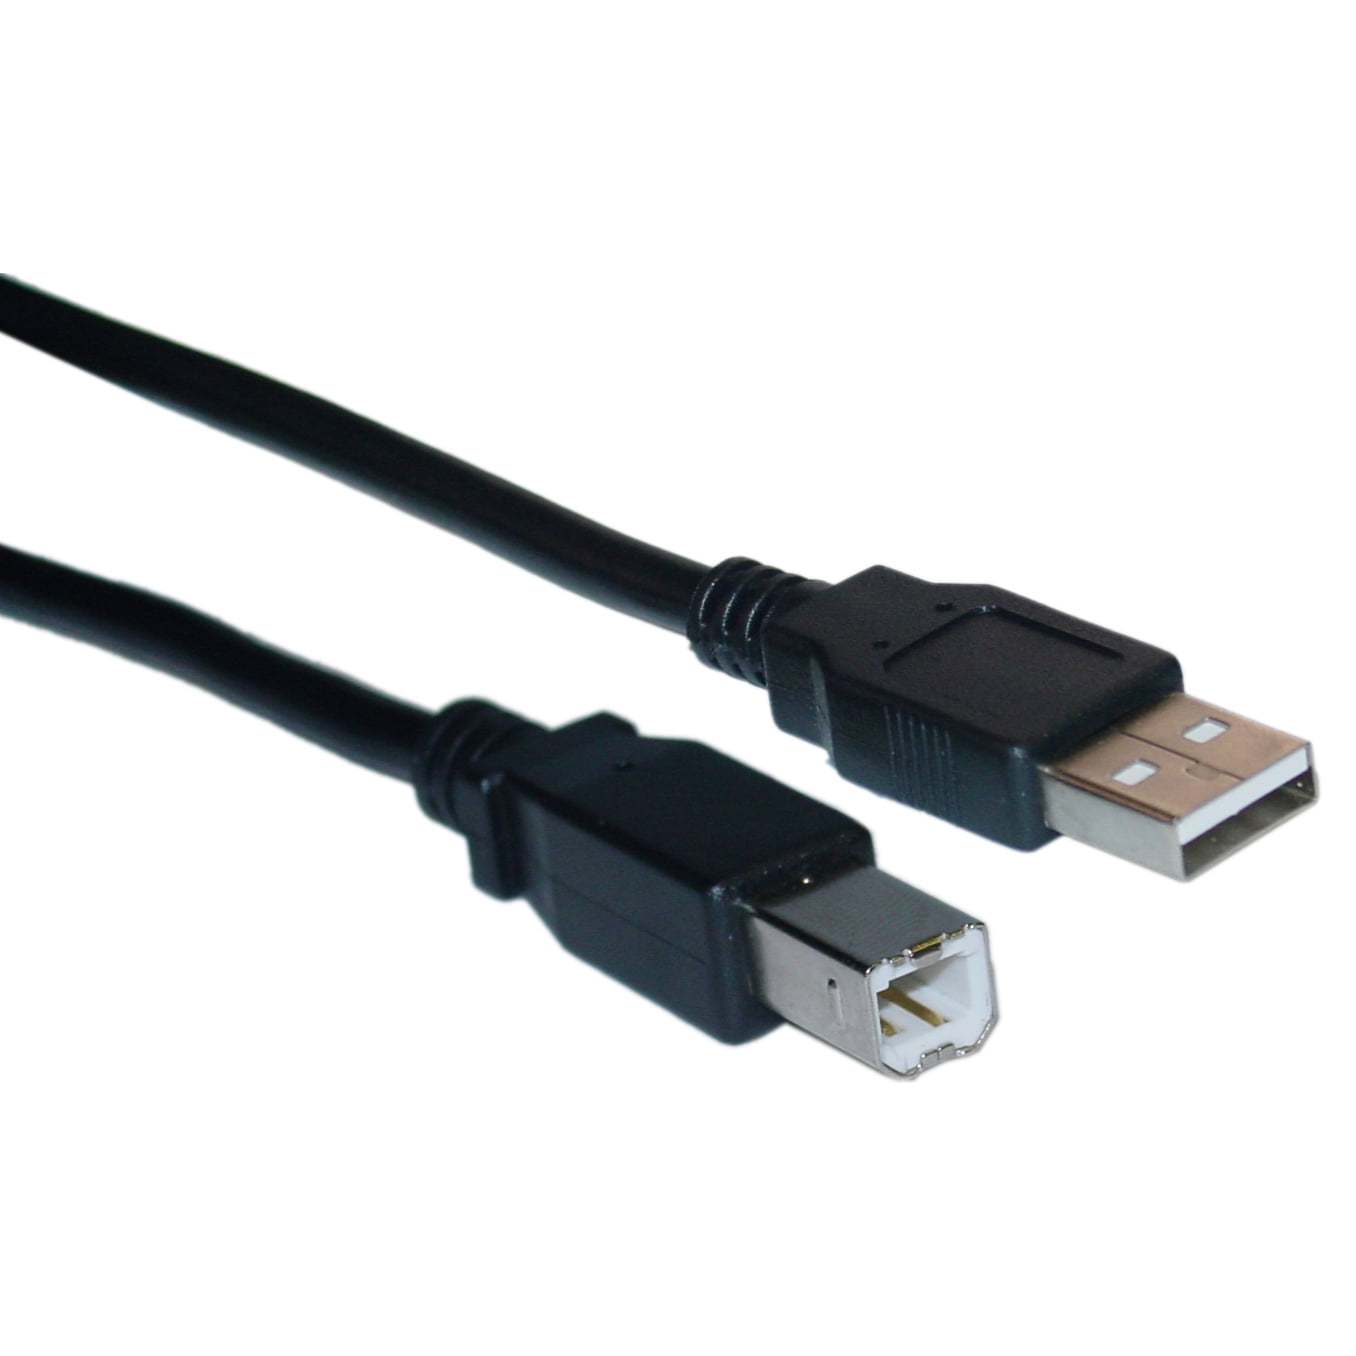 3 Ft 3 FEET White USB2.0 Type A Male to Type A Male Cable Cord 